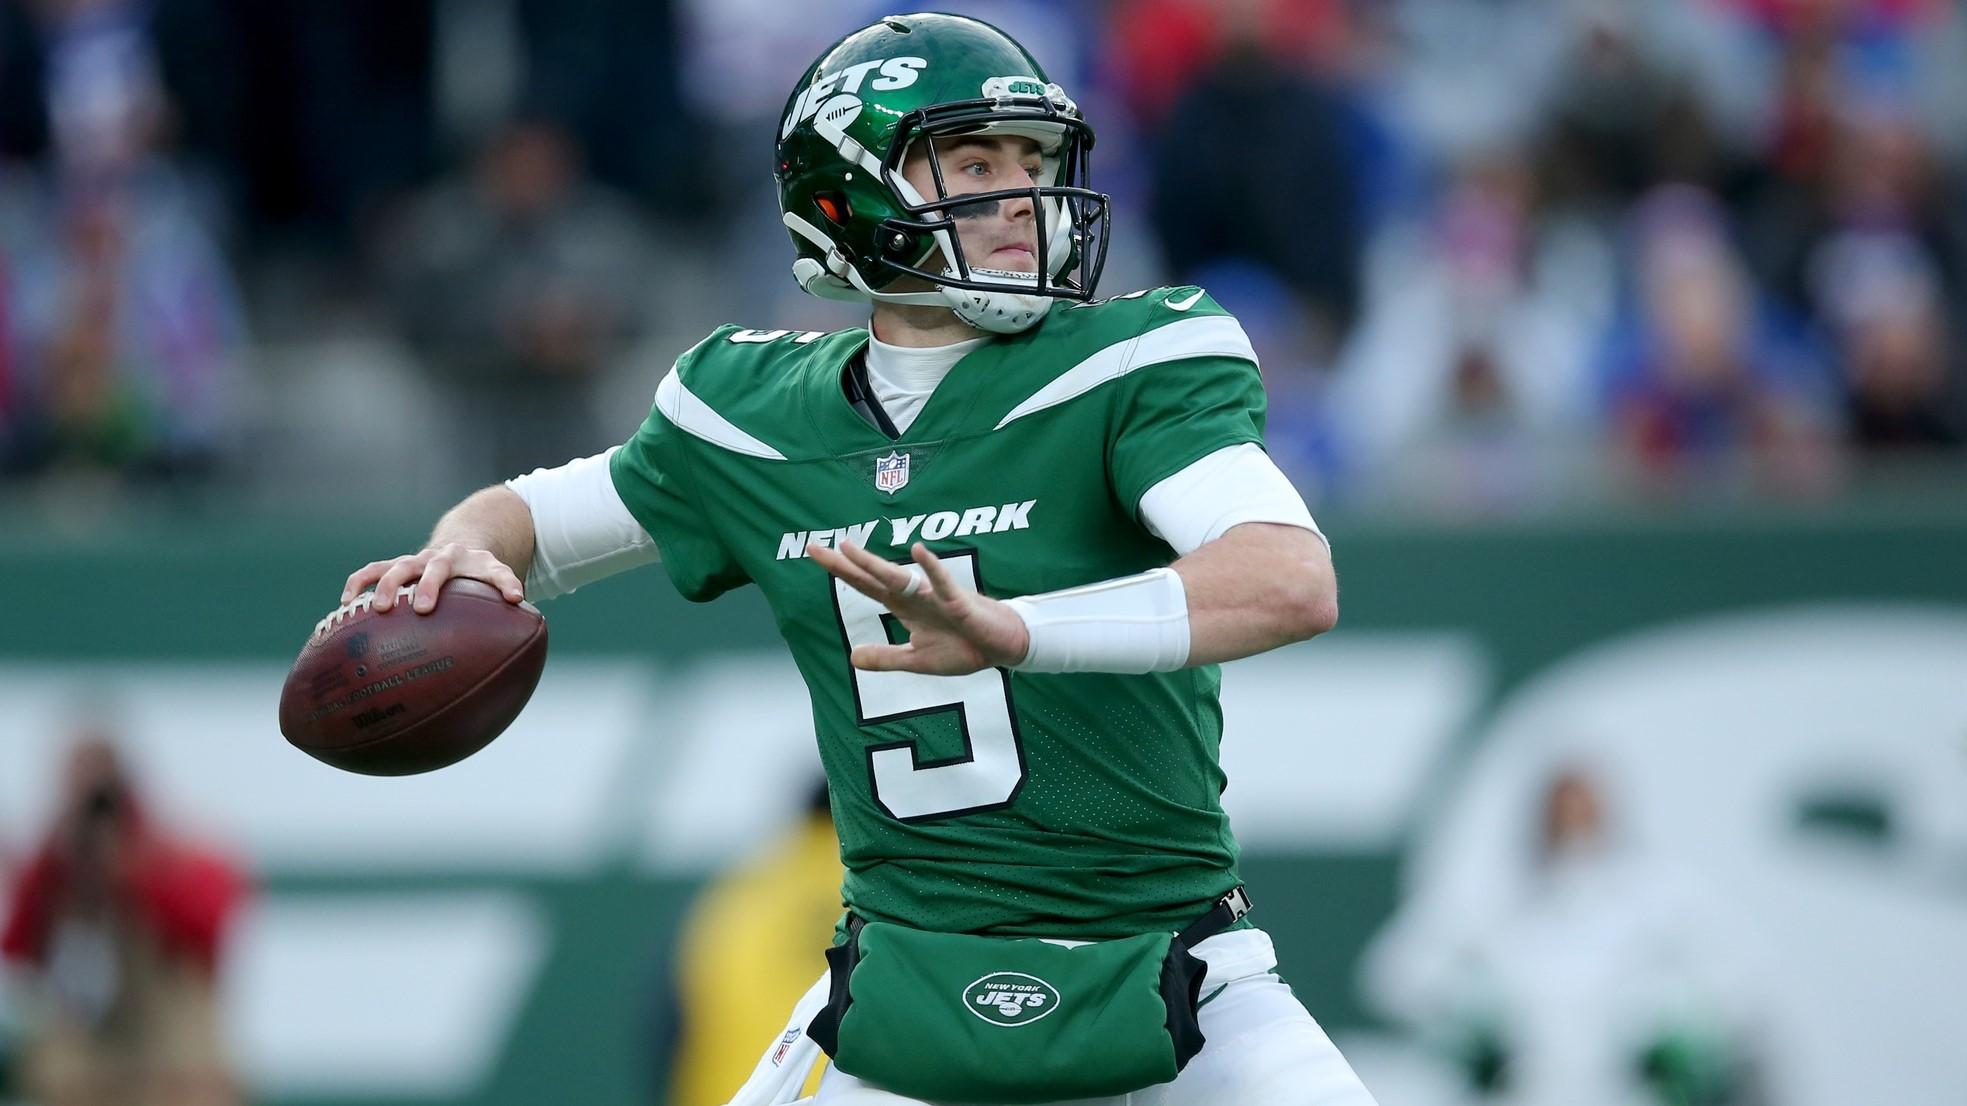 Nov 14, 2021; East Rutherford, New Jersey, USA; New York Jets quarterback Mike White (5) drops back to pass. against the Buffalo Bills during the fourth quarter at MetLife Stadium. / Brad Penner-USA TODAY Sports